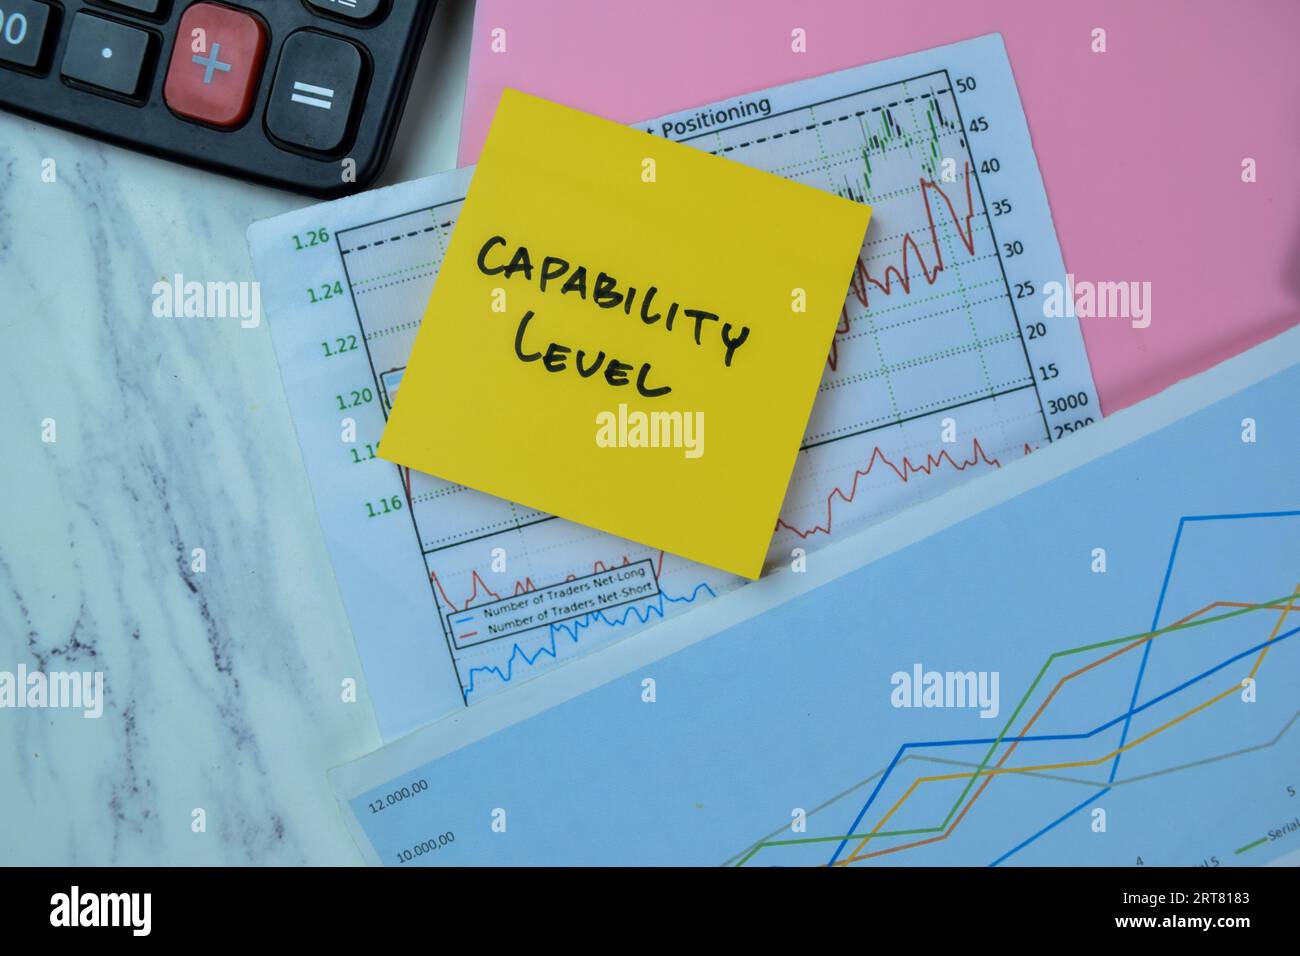 Concept of Capability Level write on sticky notes isolated on Wooden Table. Stock Photo